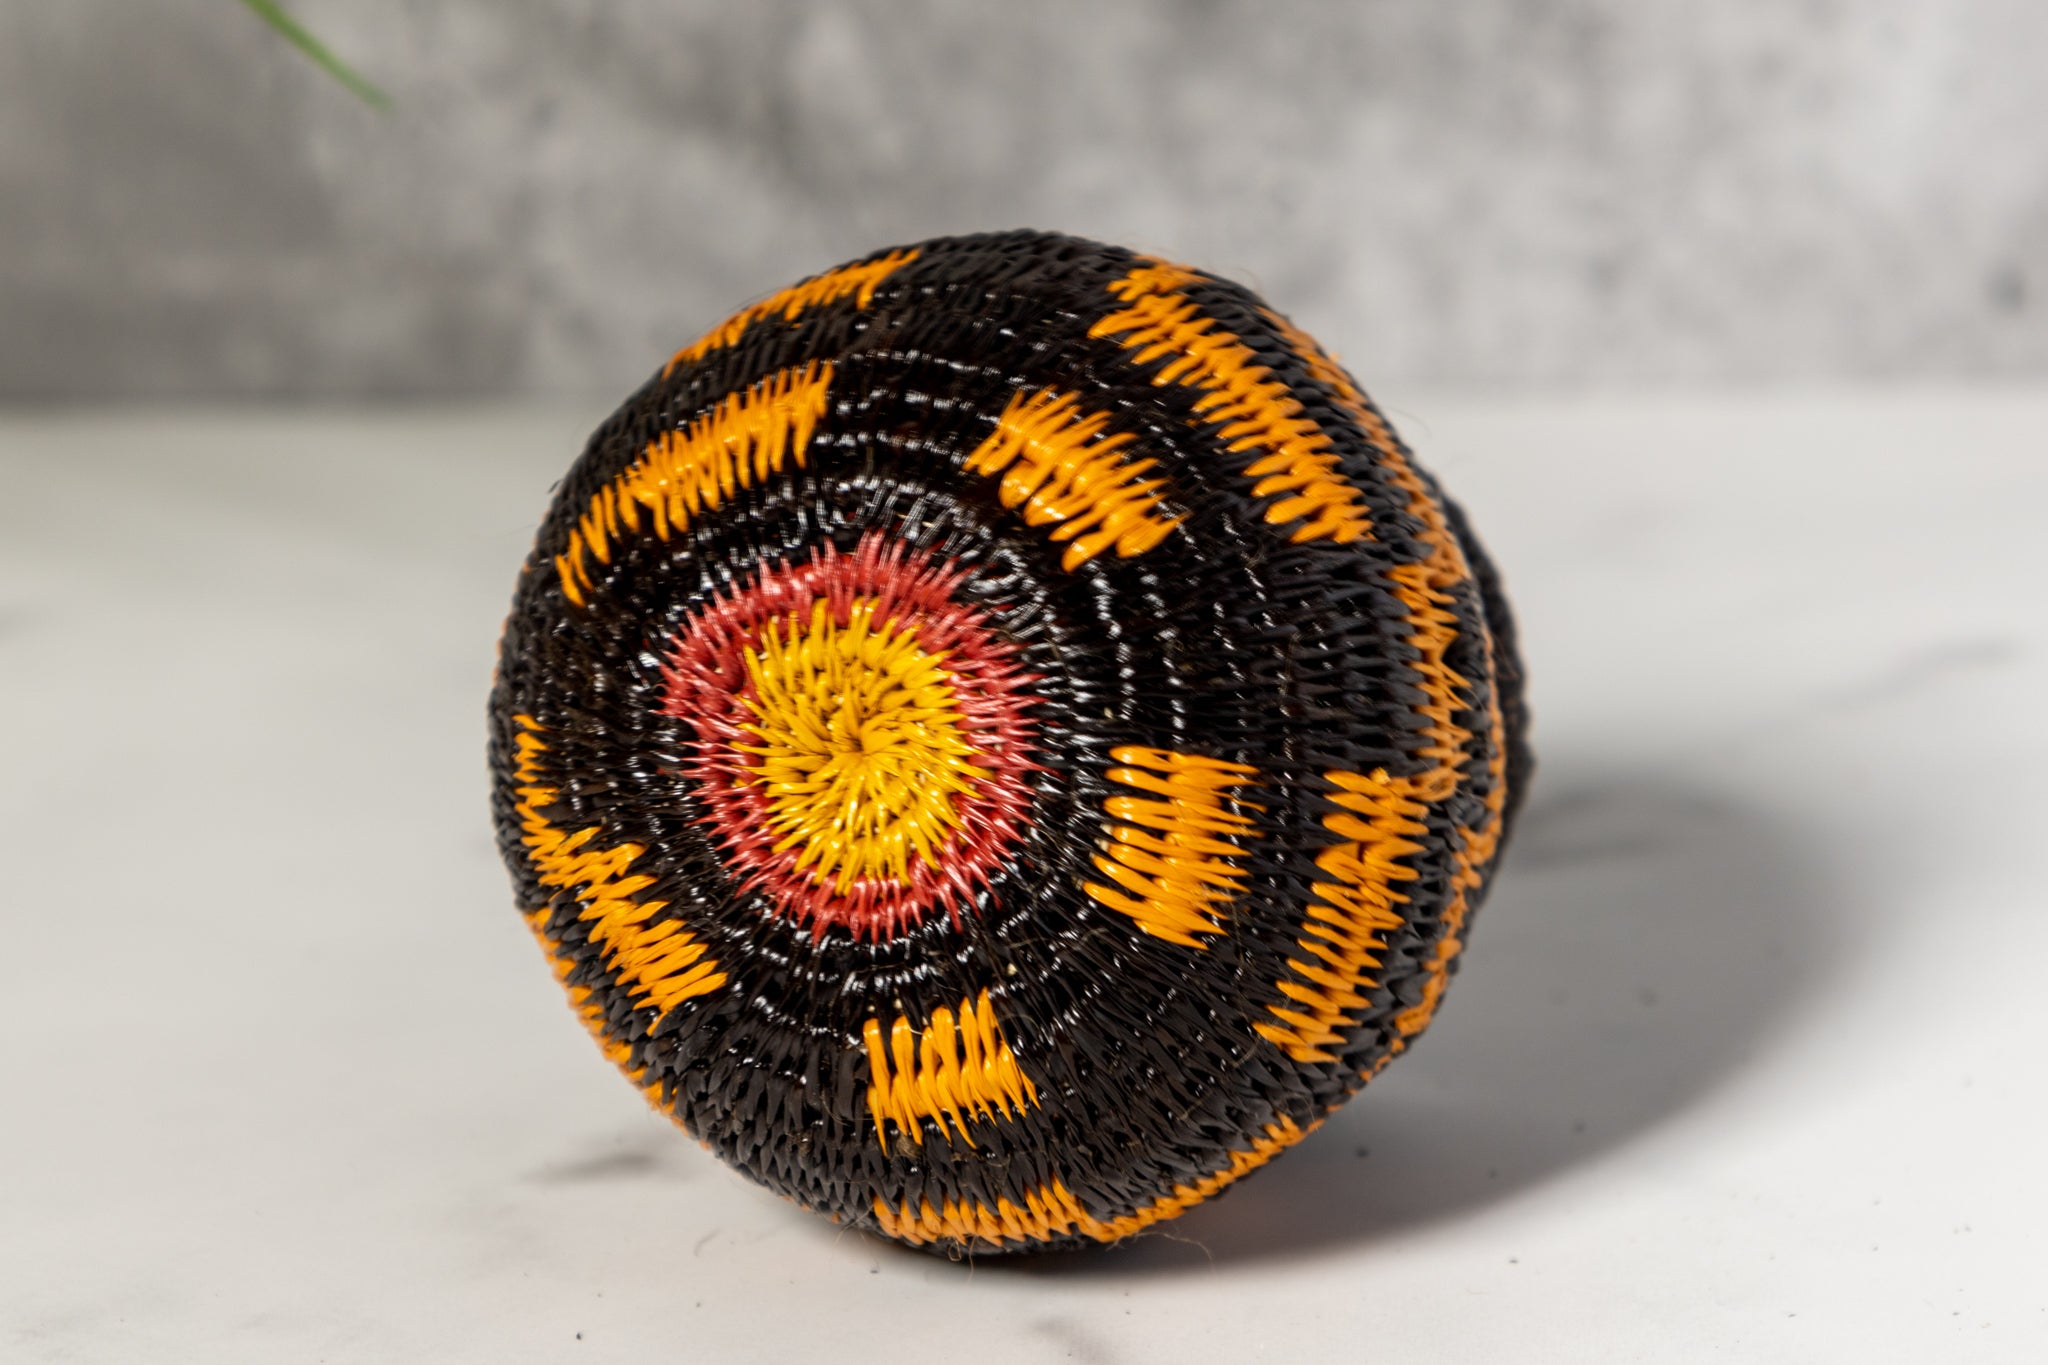 Small Gold And Black Rainforest Basket